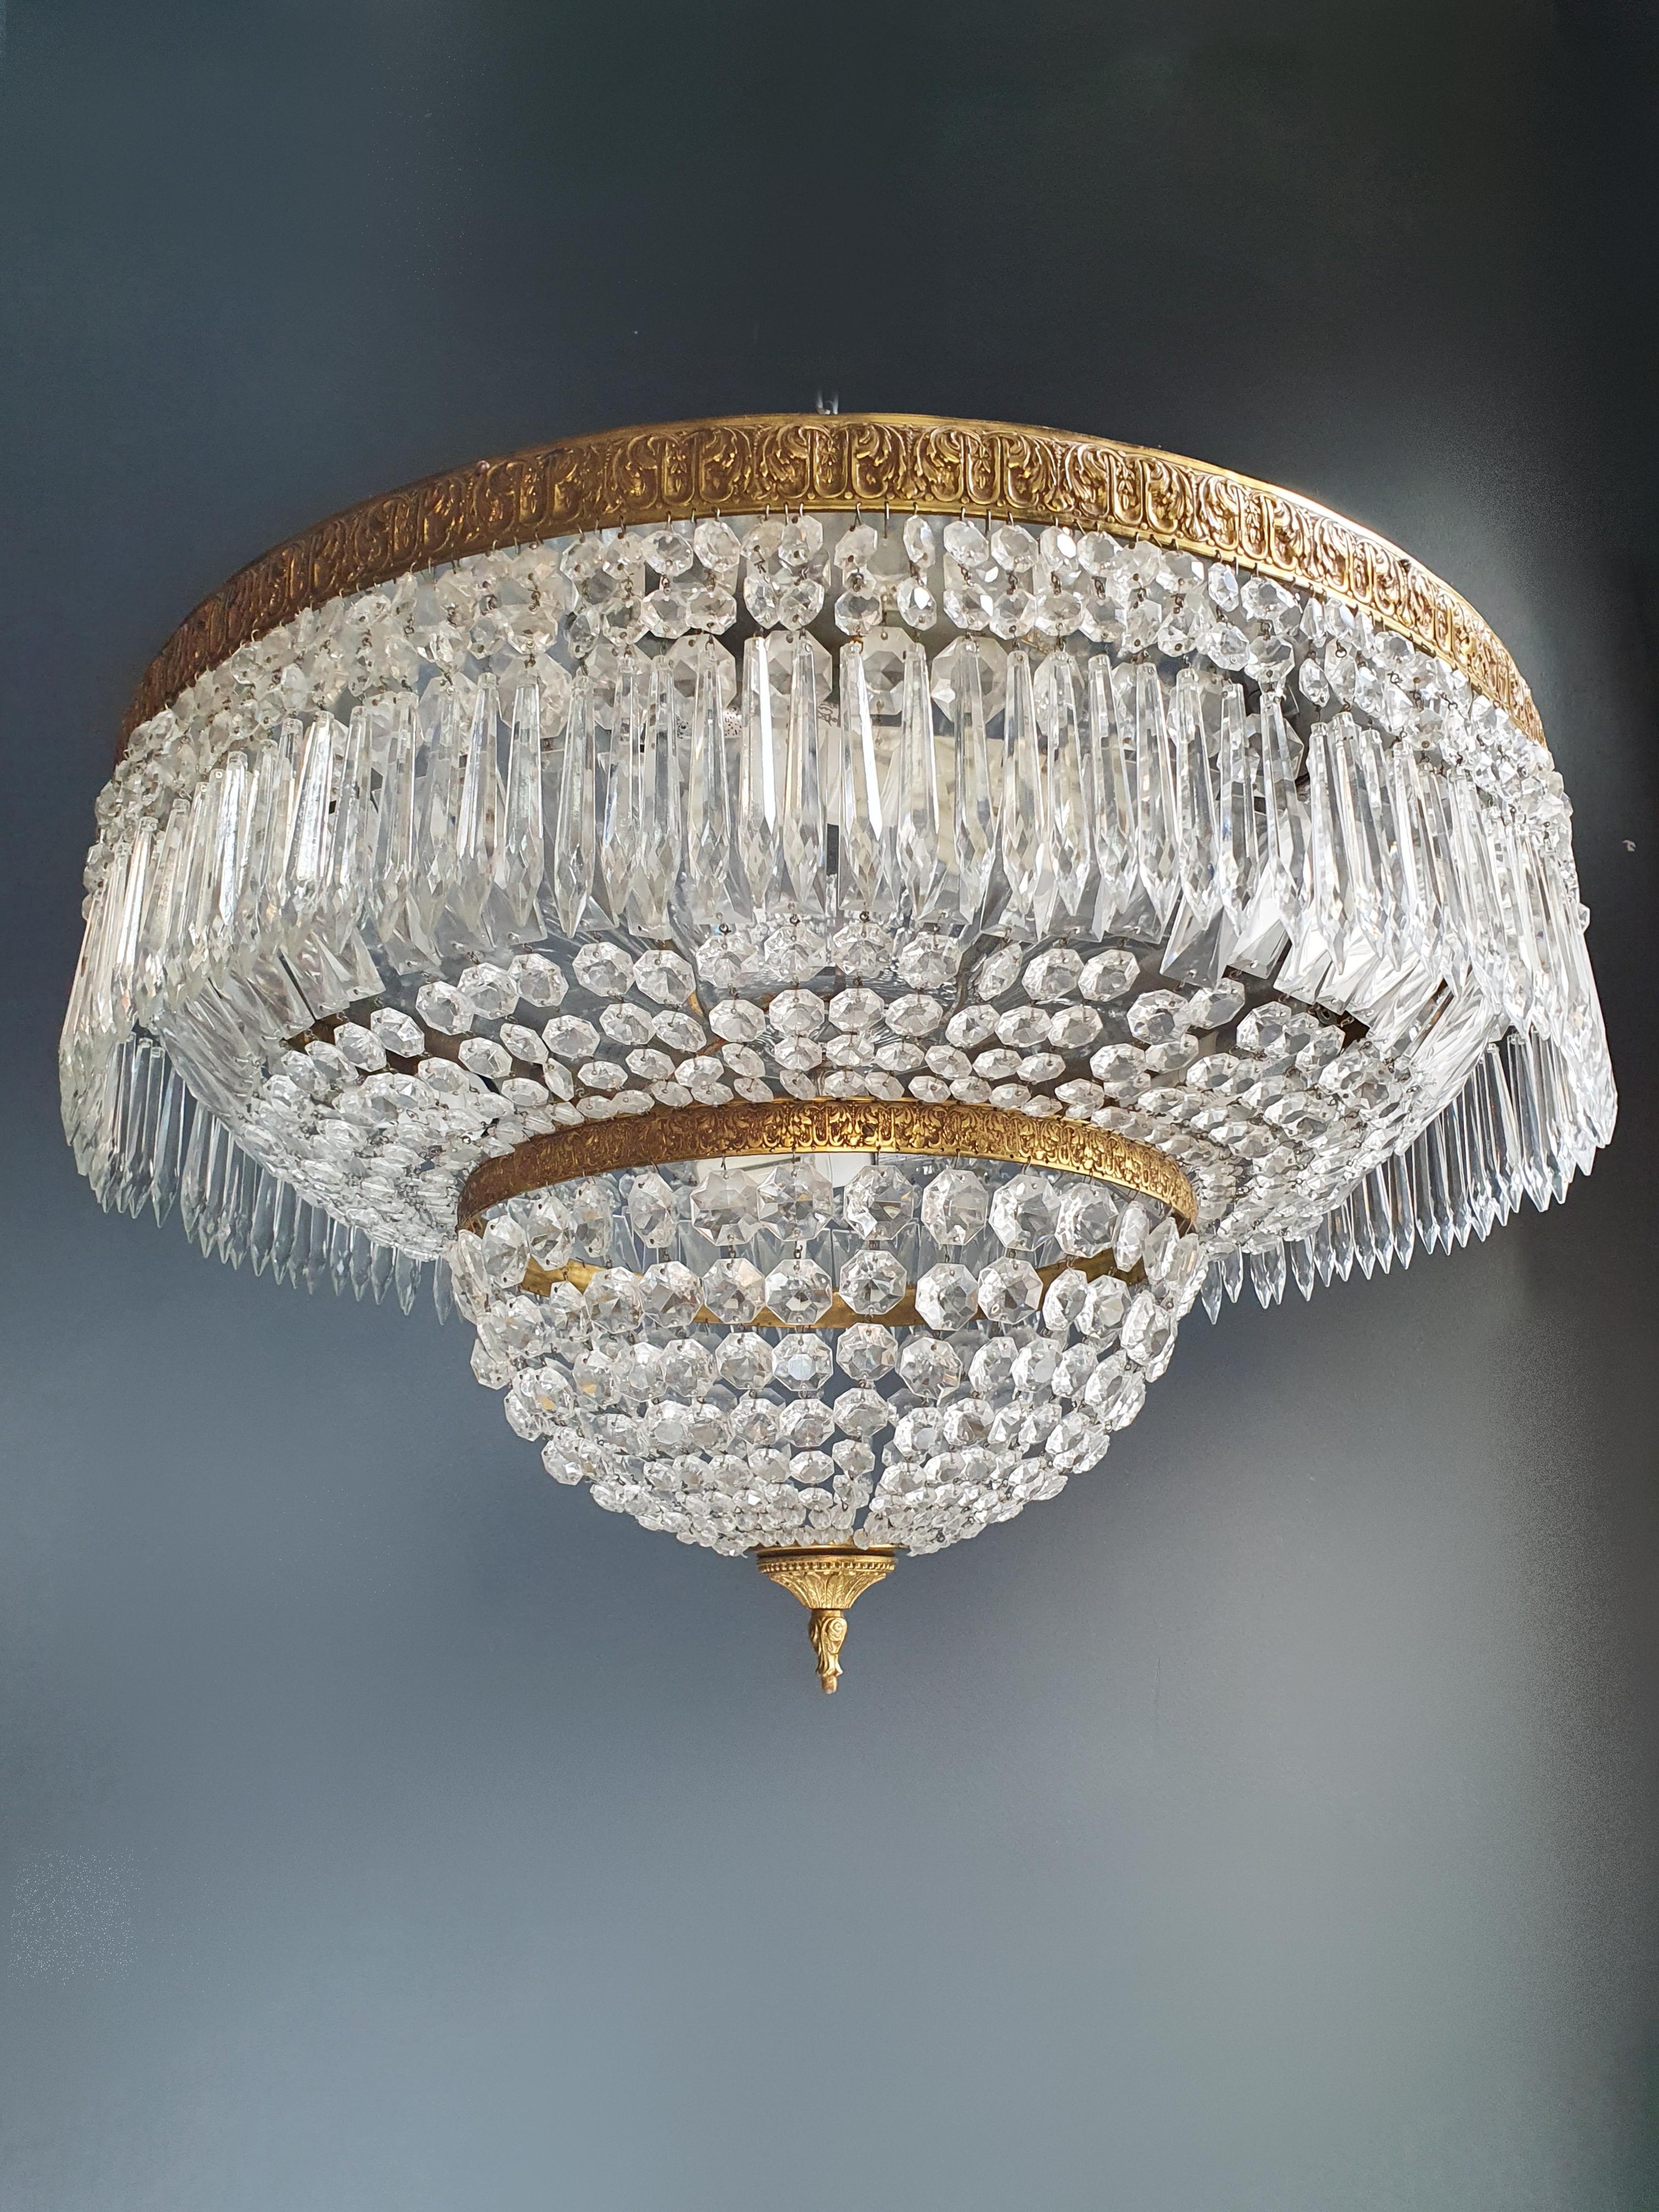 Low ceiling crystal chandelier brass.
Cabling completely renewed. Crystal hand knotted.
Measures: Total height 60 cm, height without chain 60 cm, diameter 70 cm. weight (approximately) 20kg.

Number of lights: 9 -light bulb sockets: E27
Brass